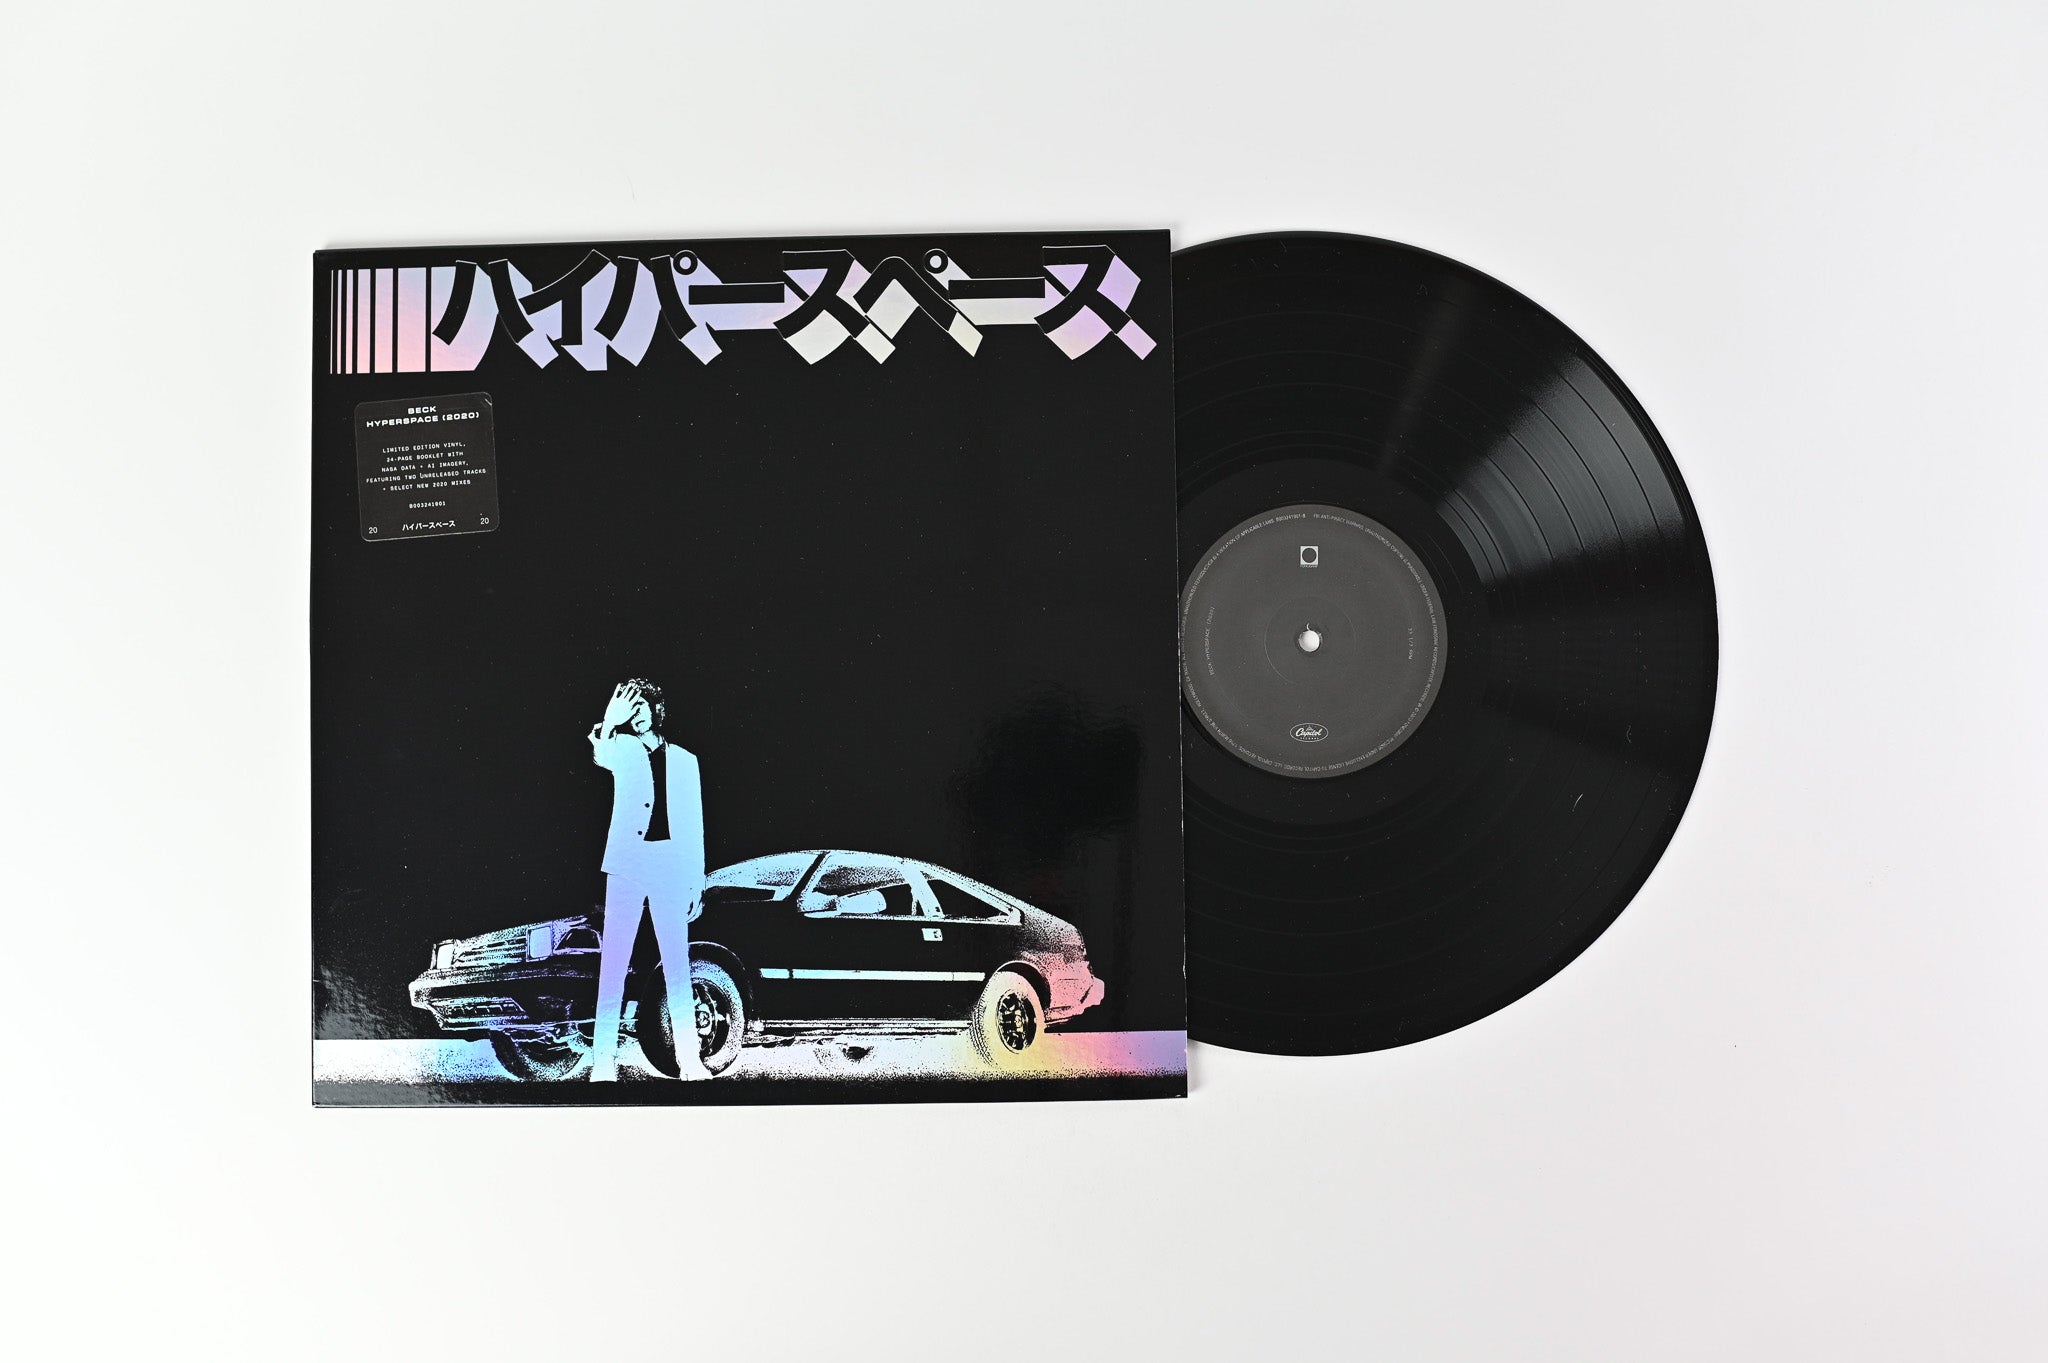 Beck - Hyperspace (2020) on Fonograf Ltd Deluxe Edition